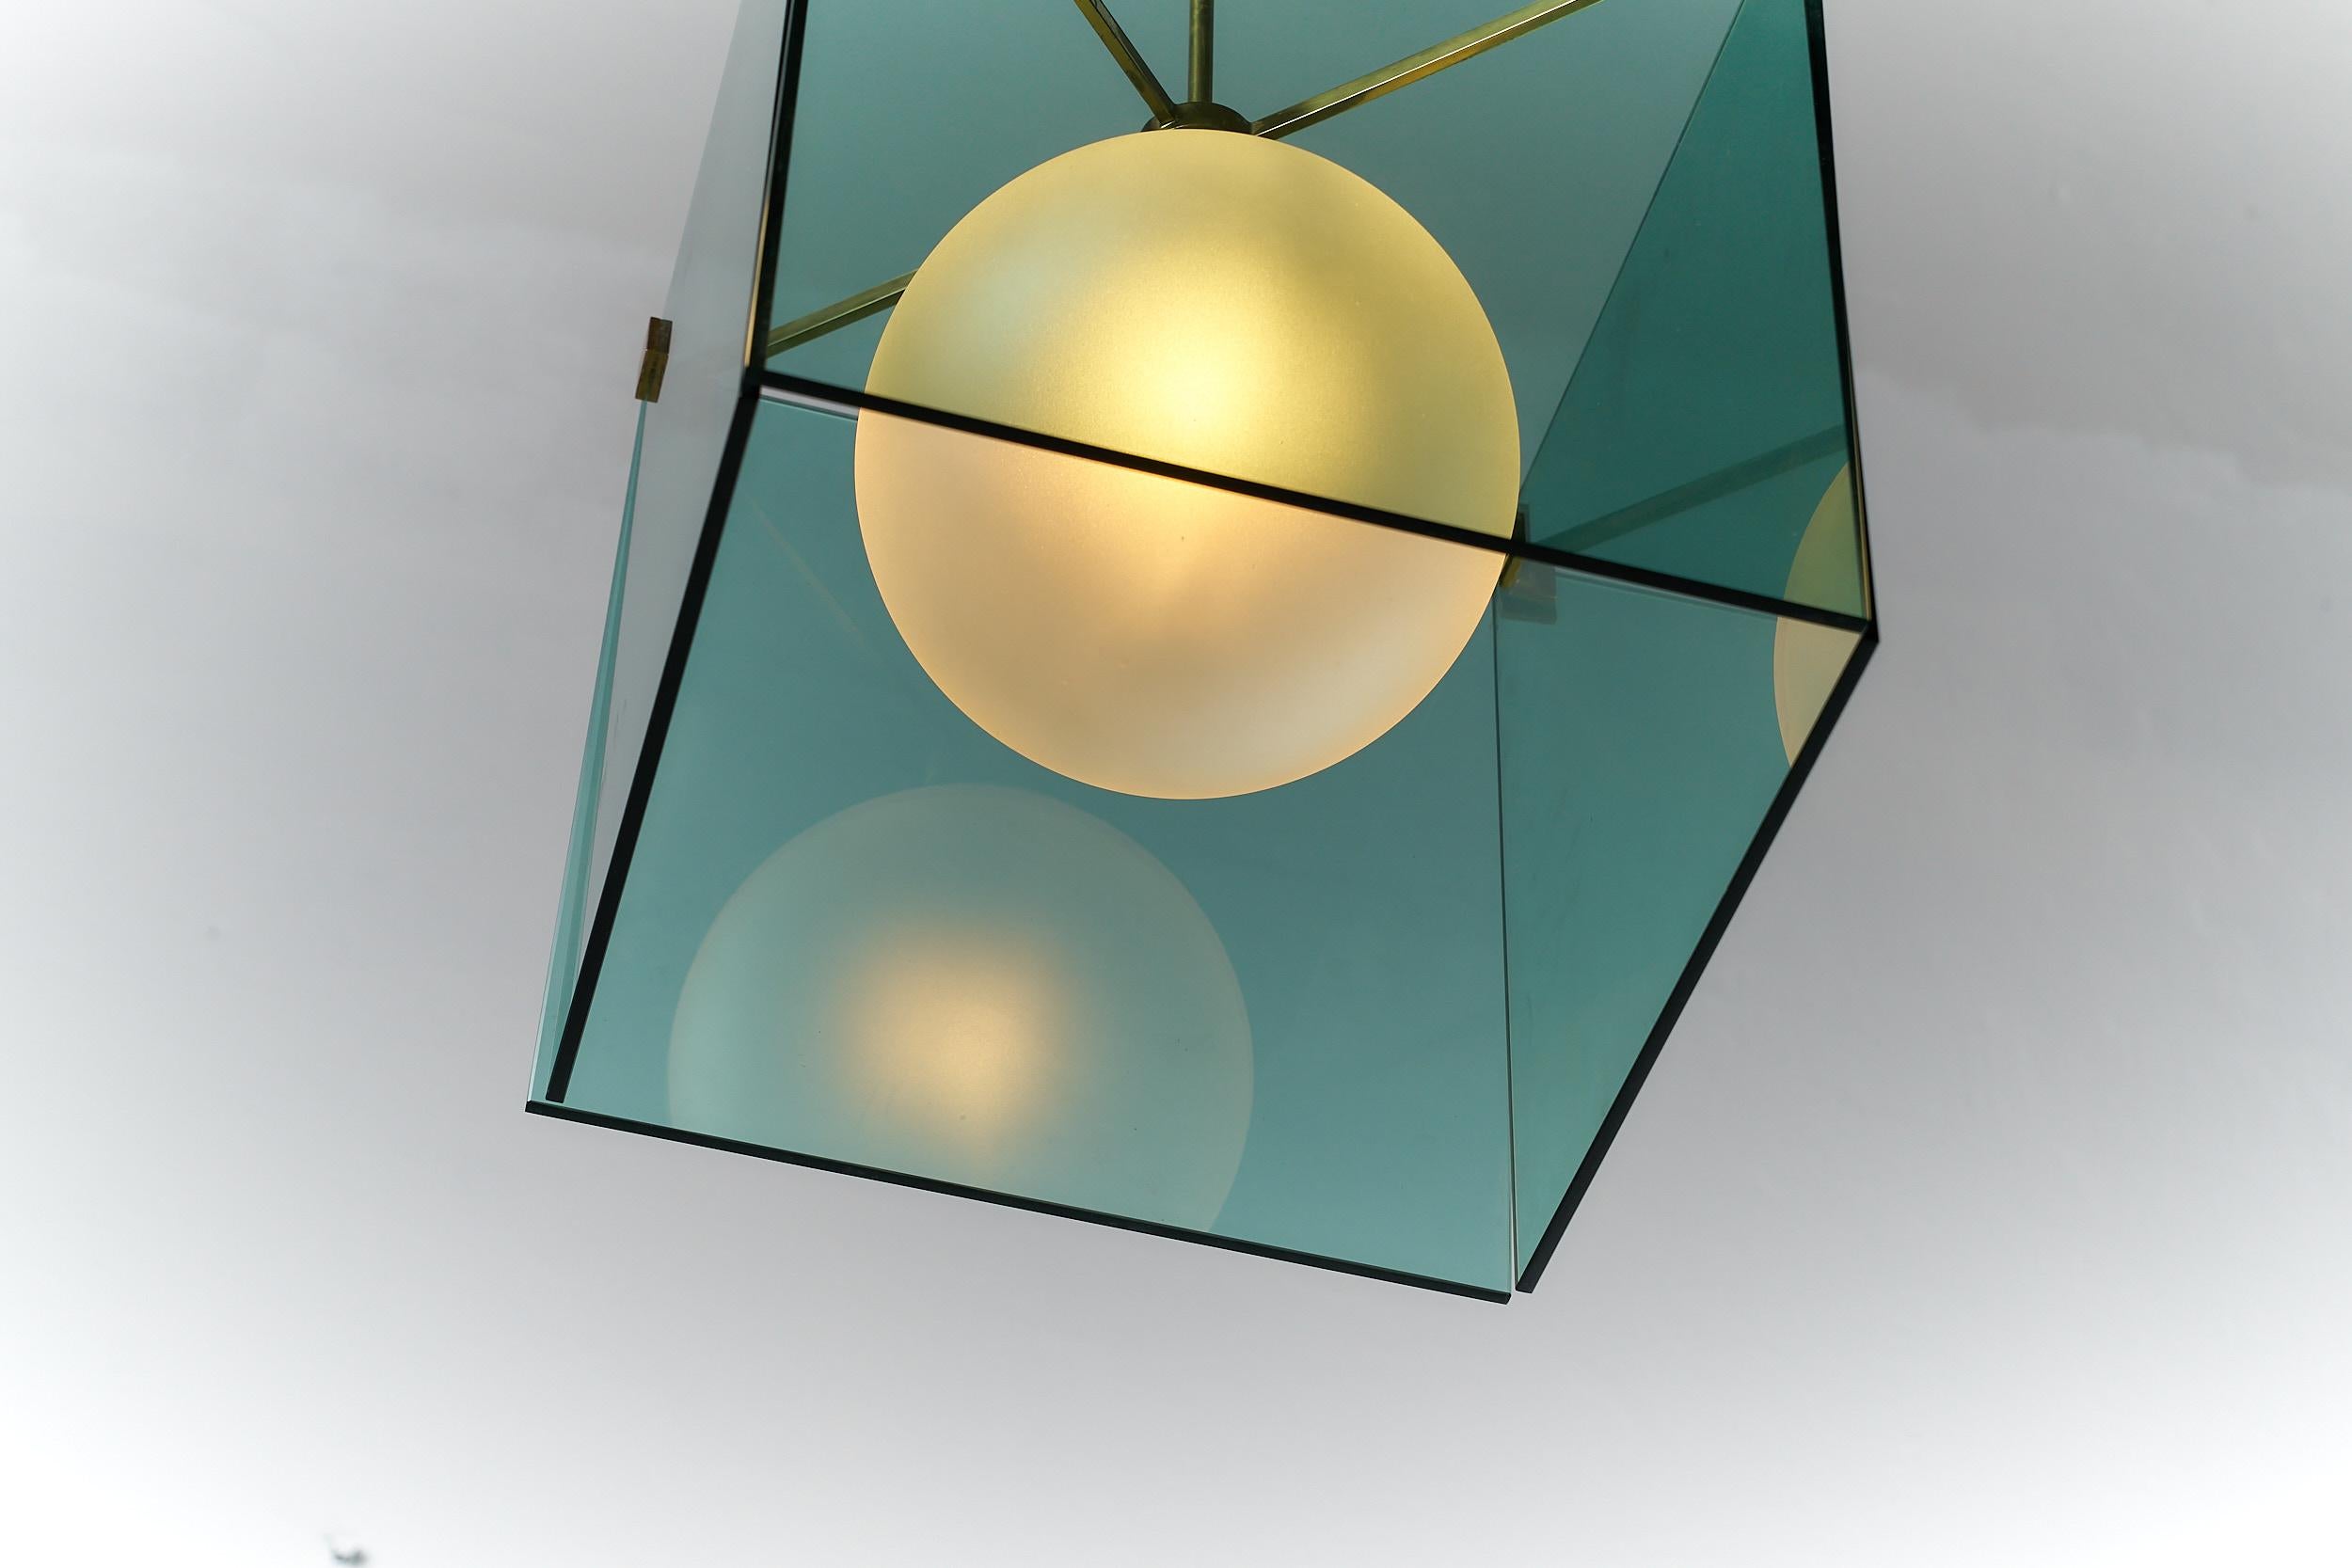 Mid-Century Modern Model No. 2073 Ceiling Light by Max Ingrand for Fontana Arte, Italy, 1964 For Sale